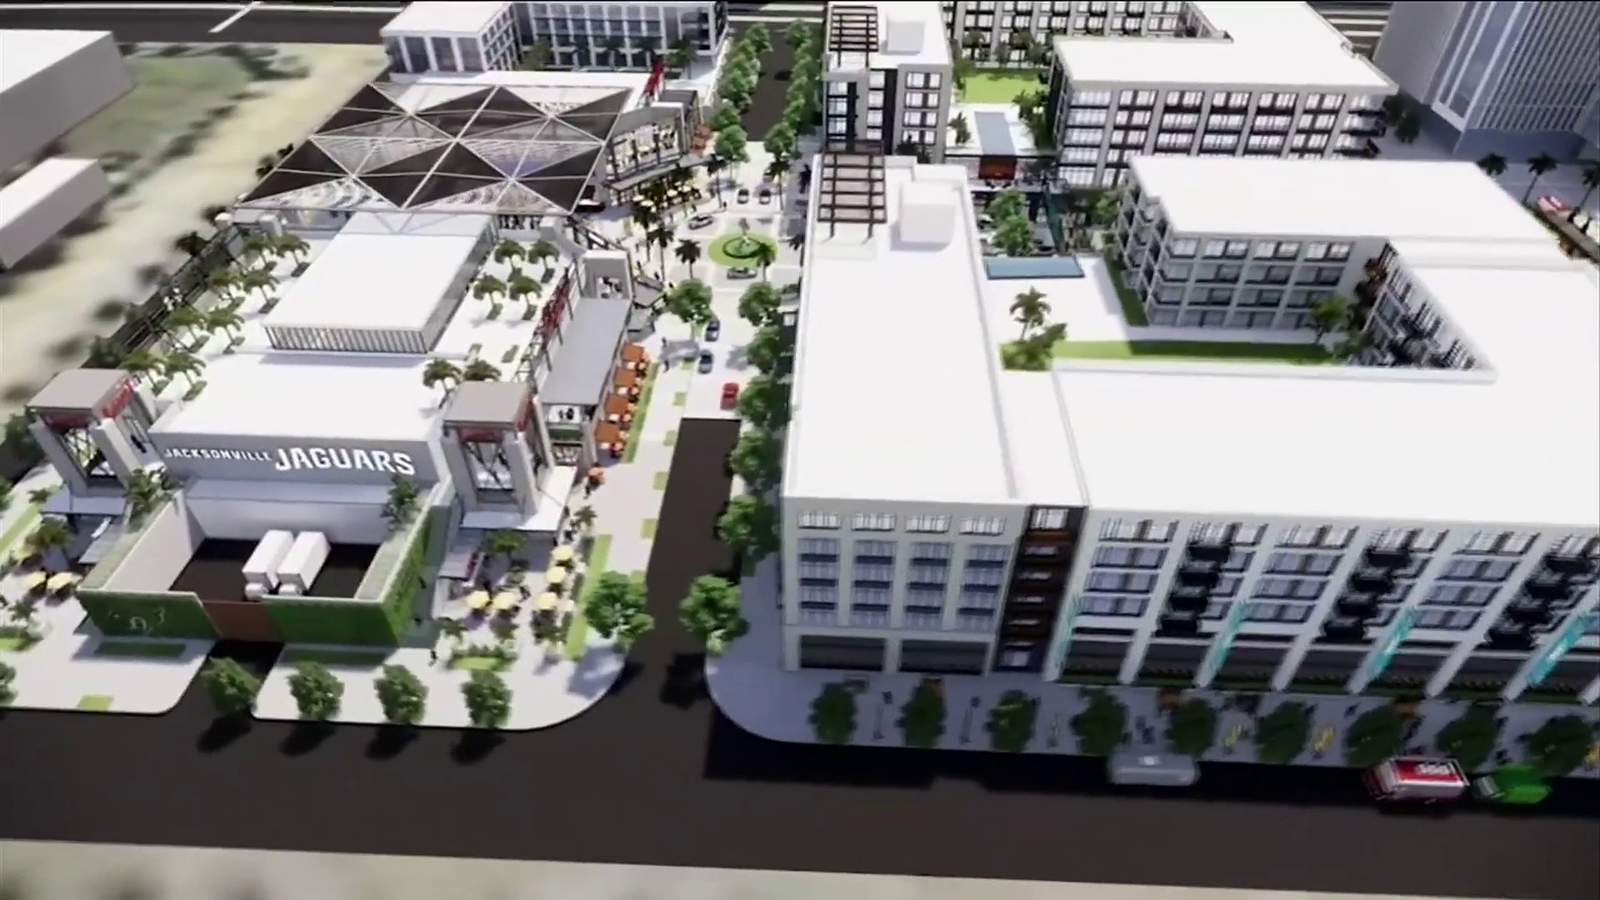 Is City Council ready to make Lot J project a reality?